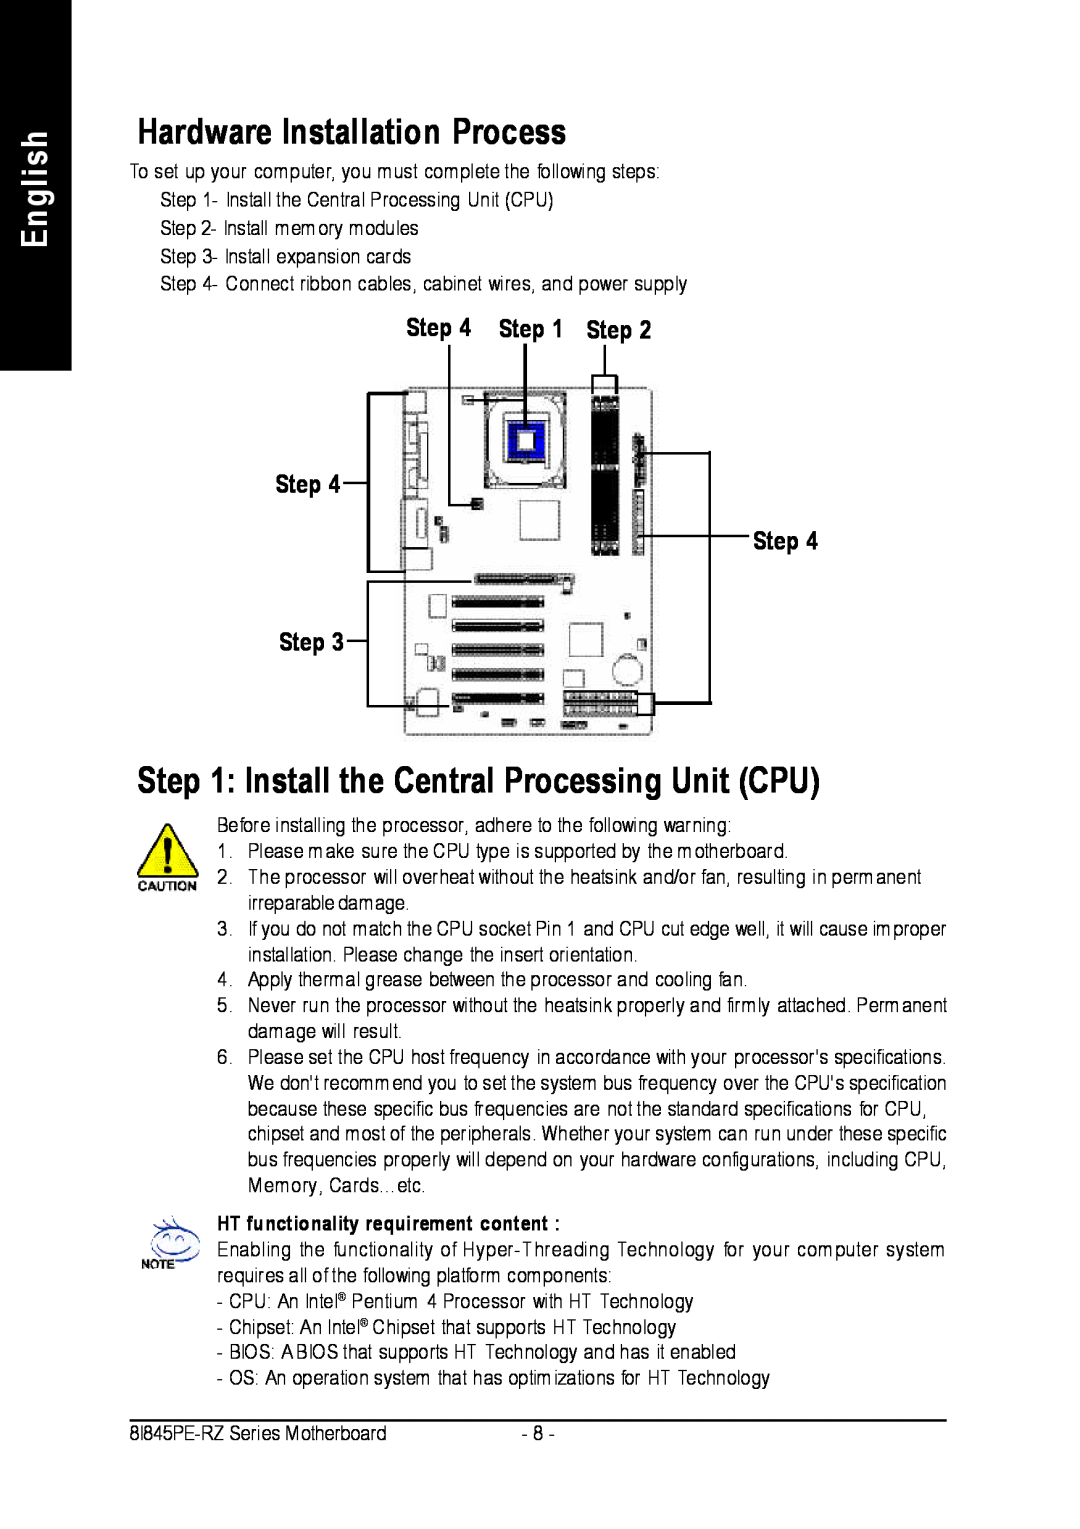 Intel 8I845PE-RZ Hardware Installation Process, Install the Central Processing Unit CPU, English, Step Step Step Step 